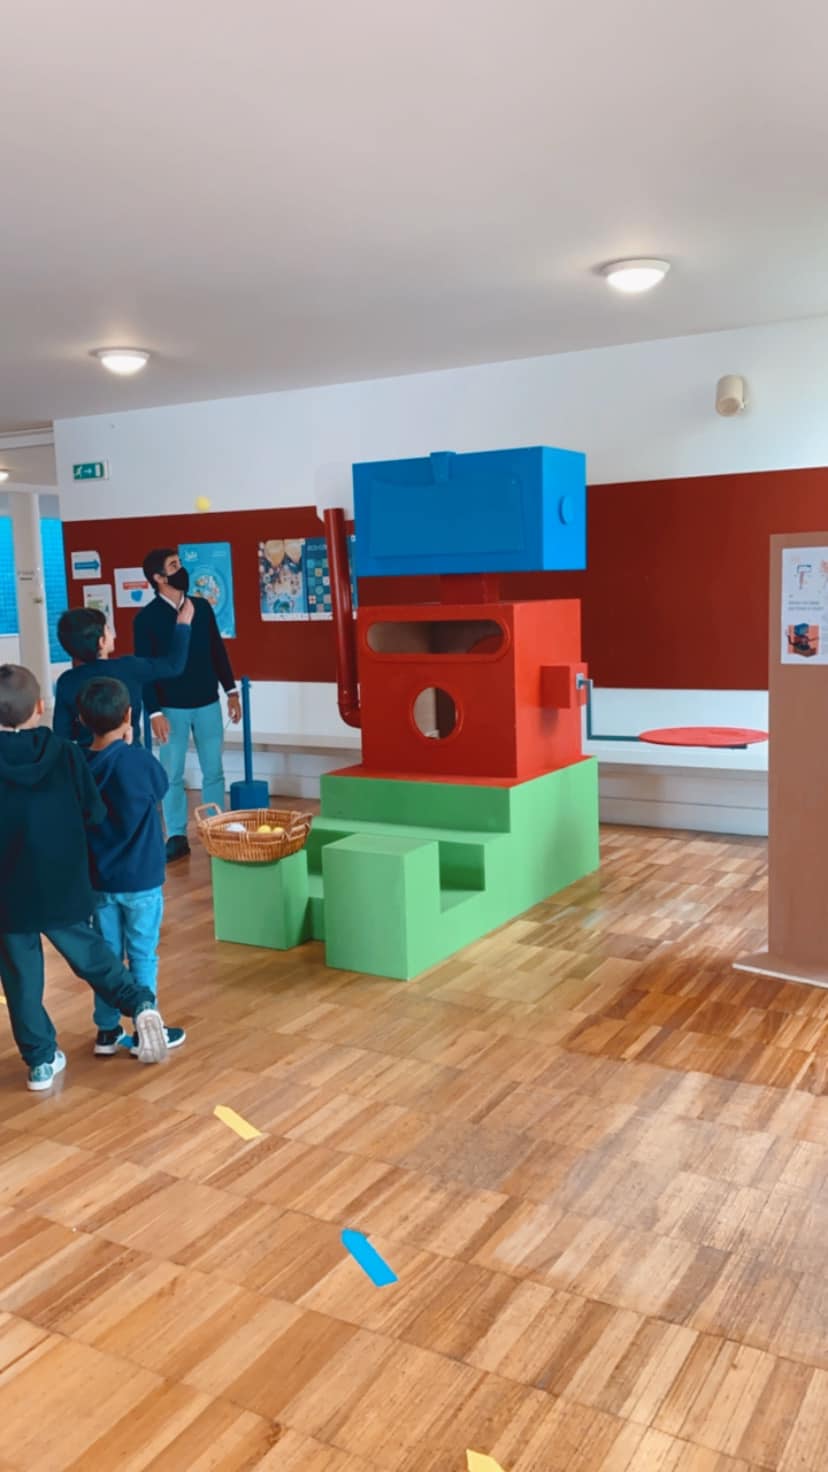 MyMachine Portugal delivers a first (in this school year) finished Working Prototype to the primary school